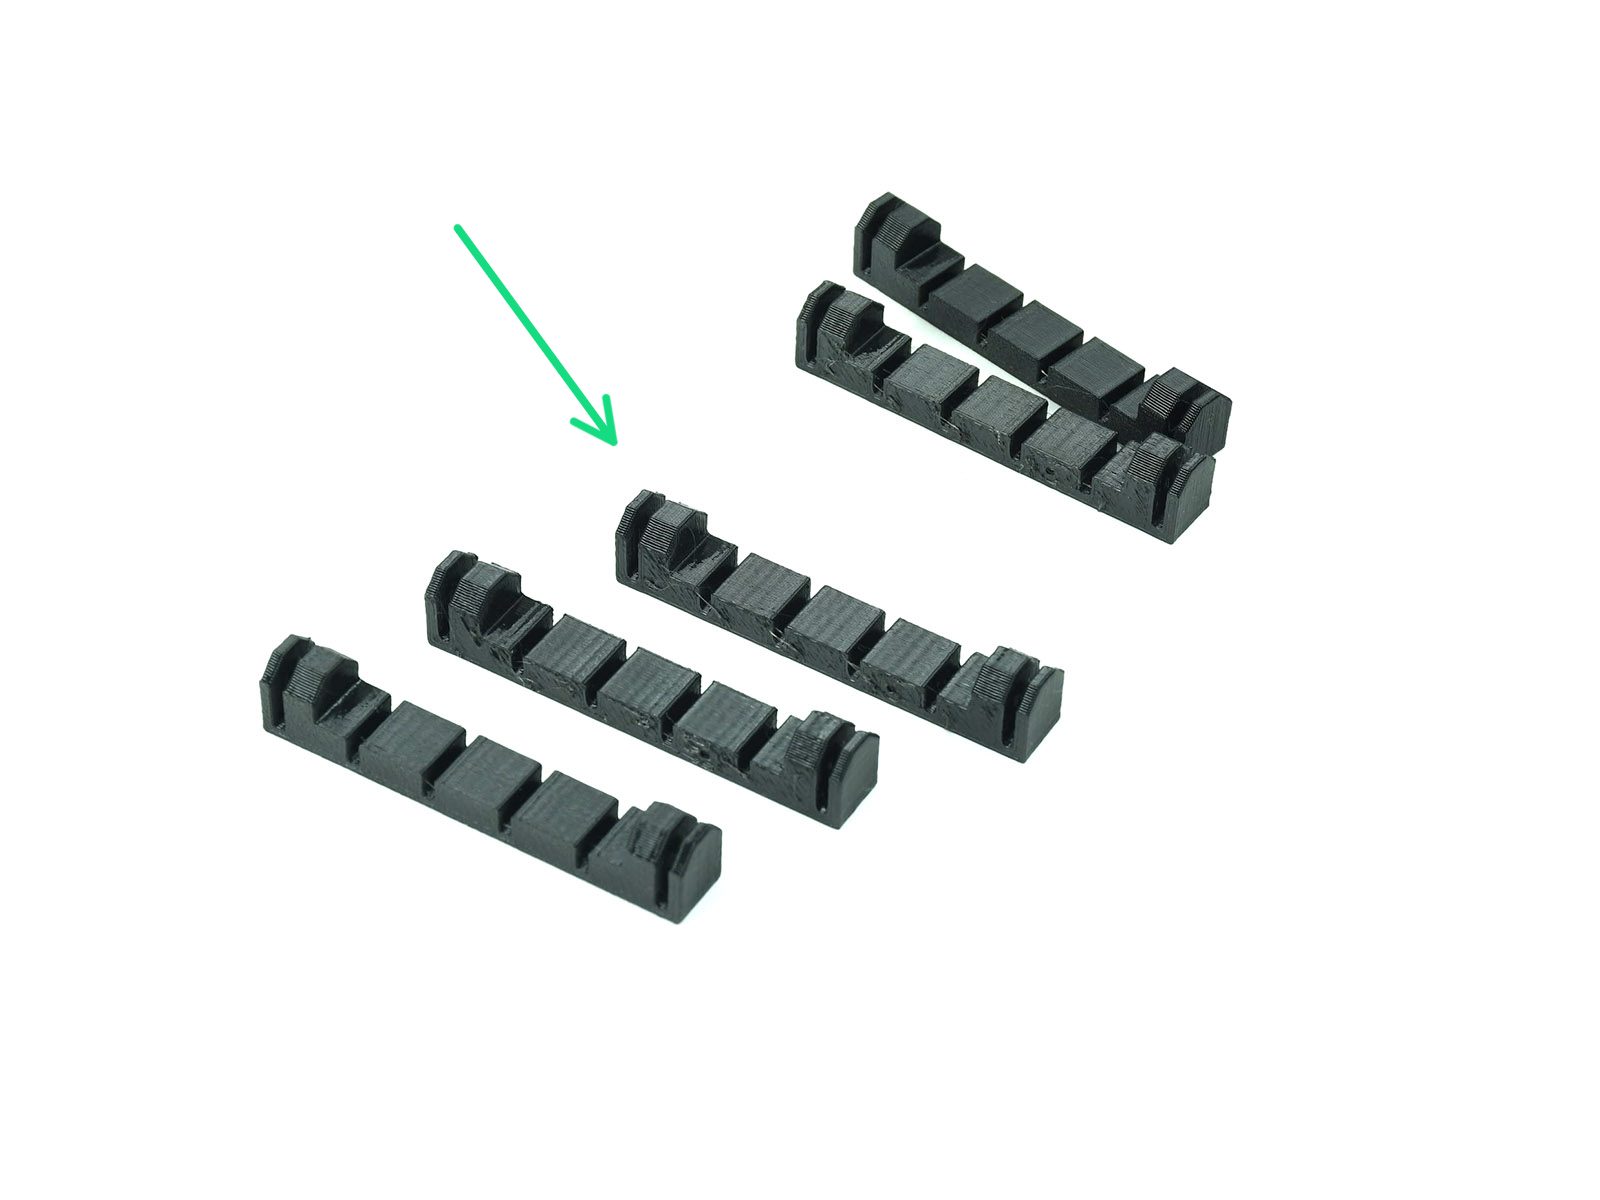 Parts preparation: Plate-holders